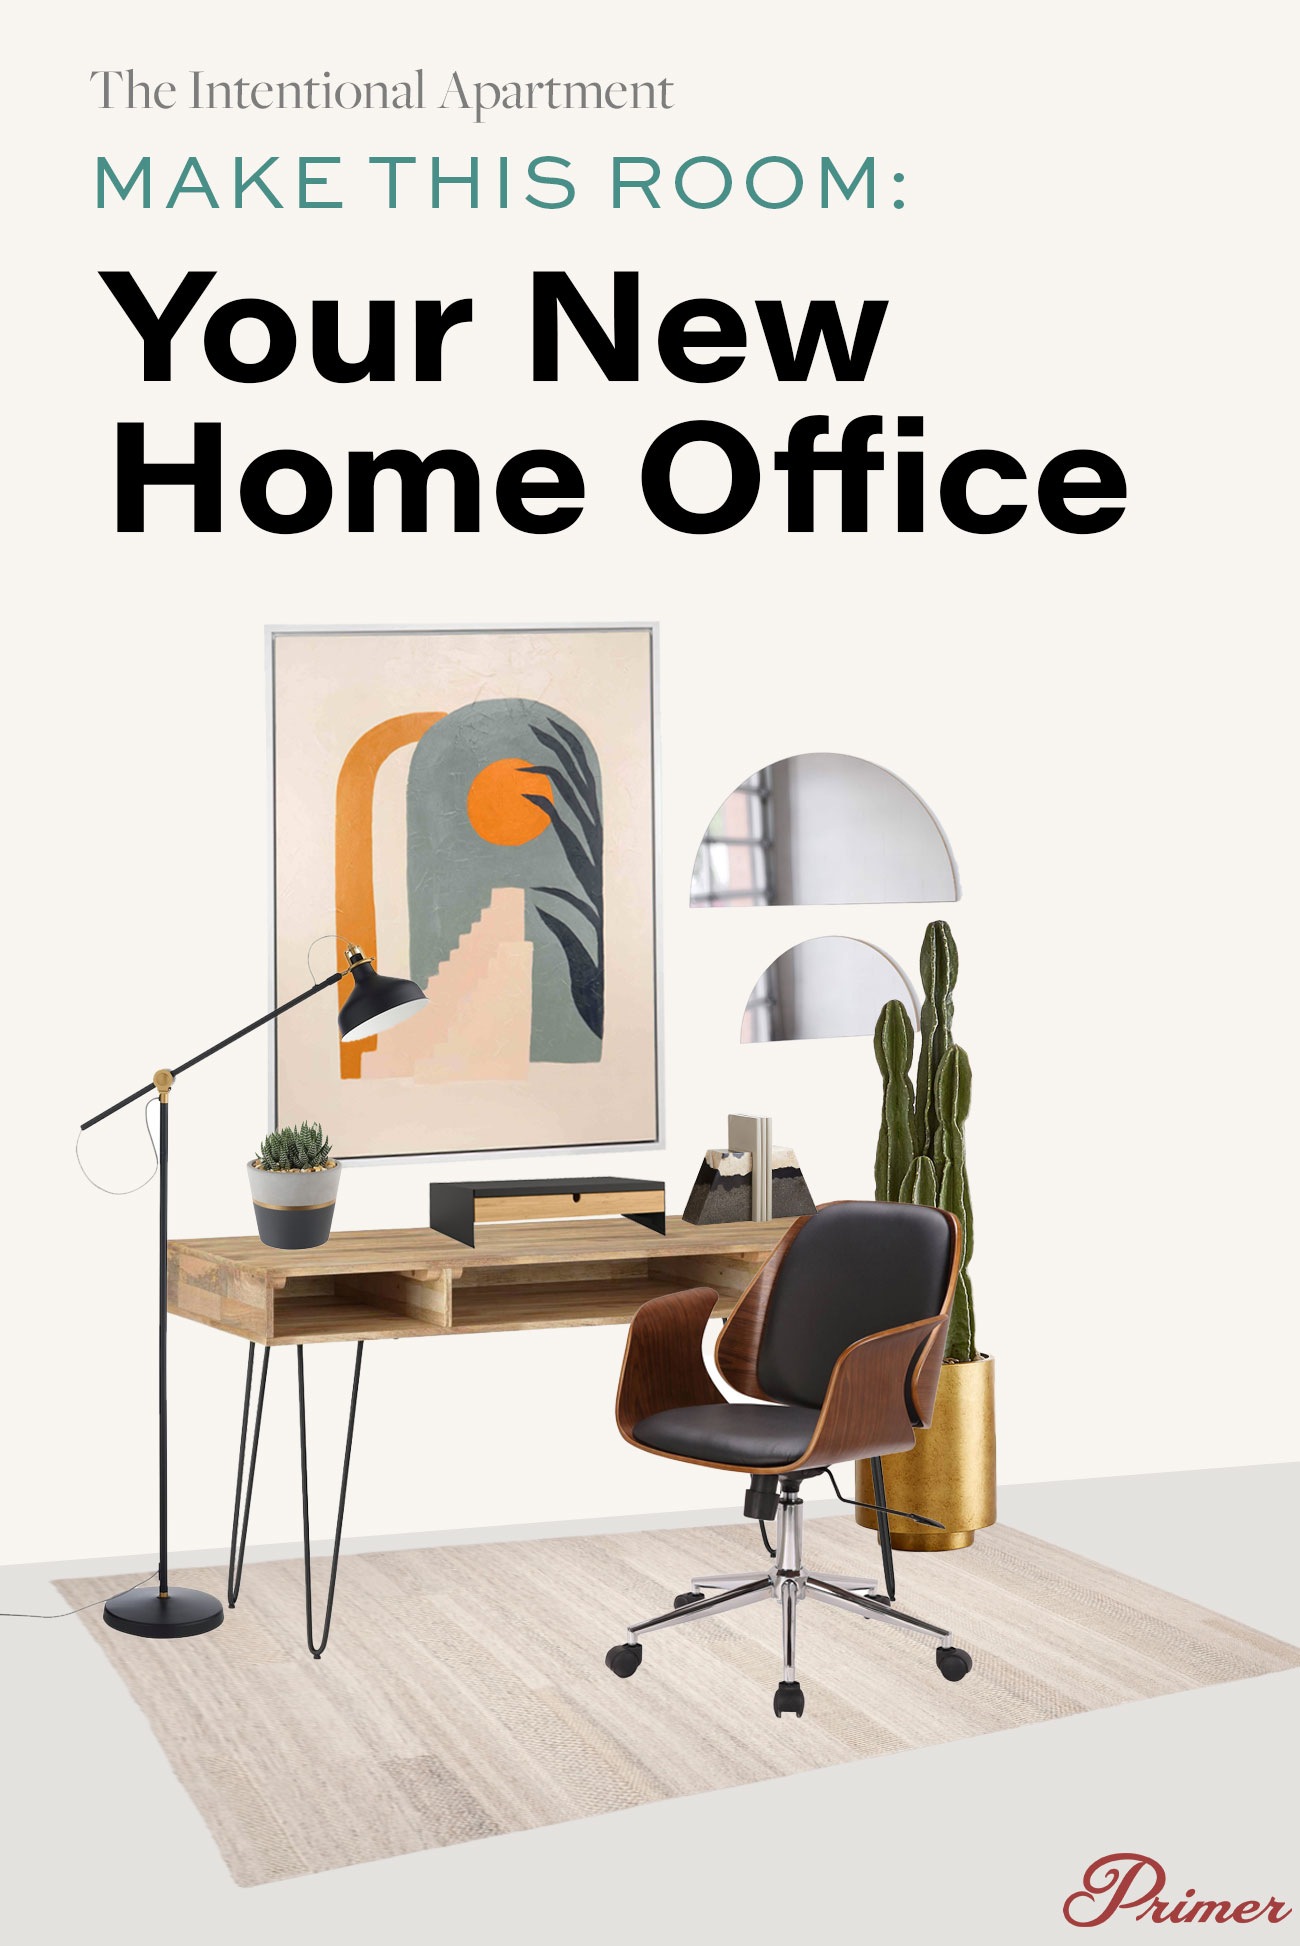 Make This Room: Your New Home Office